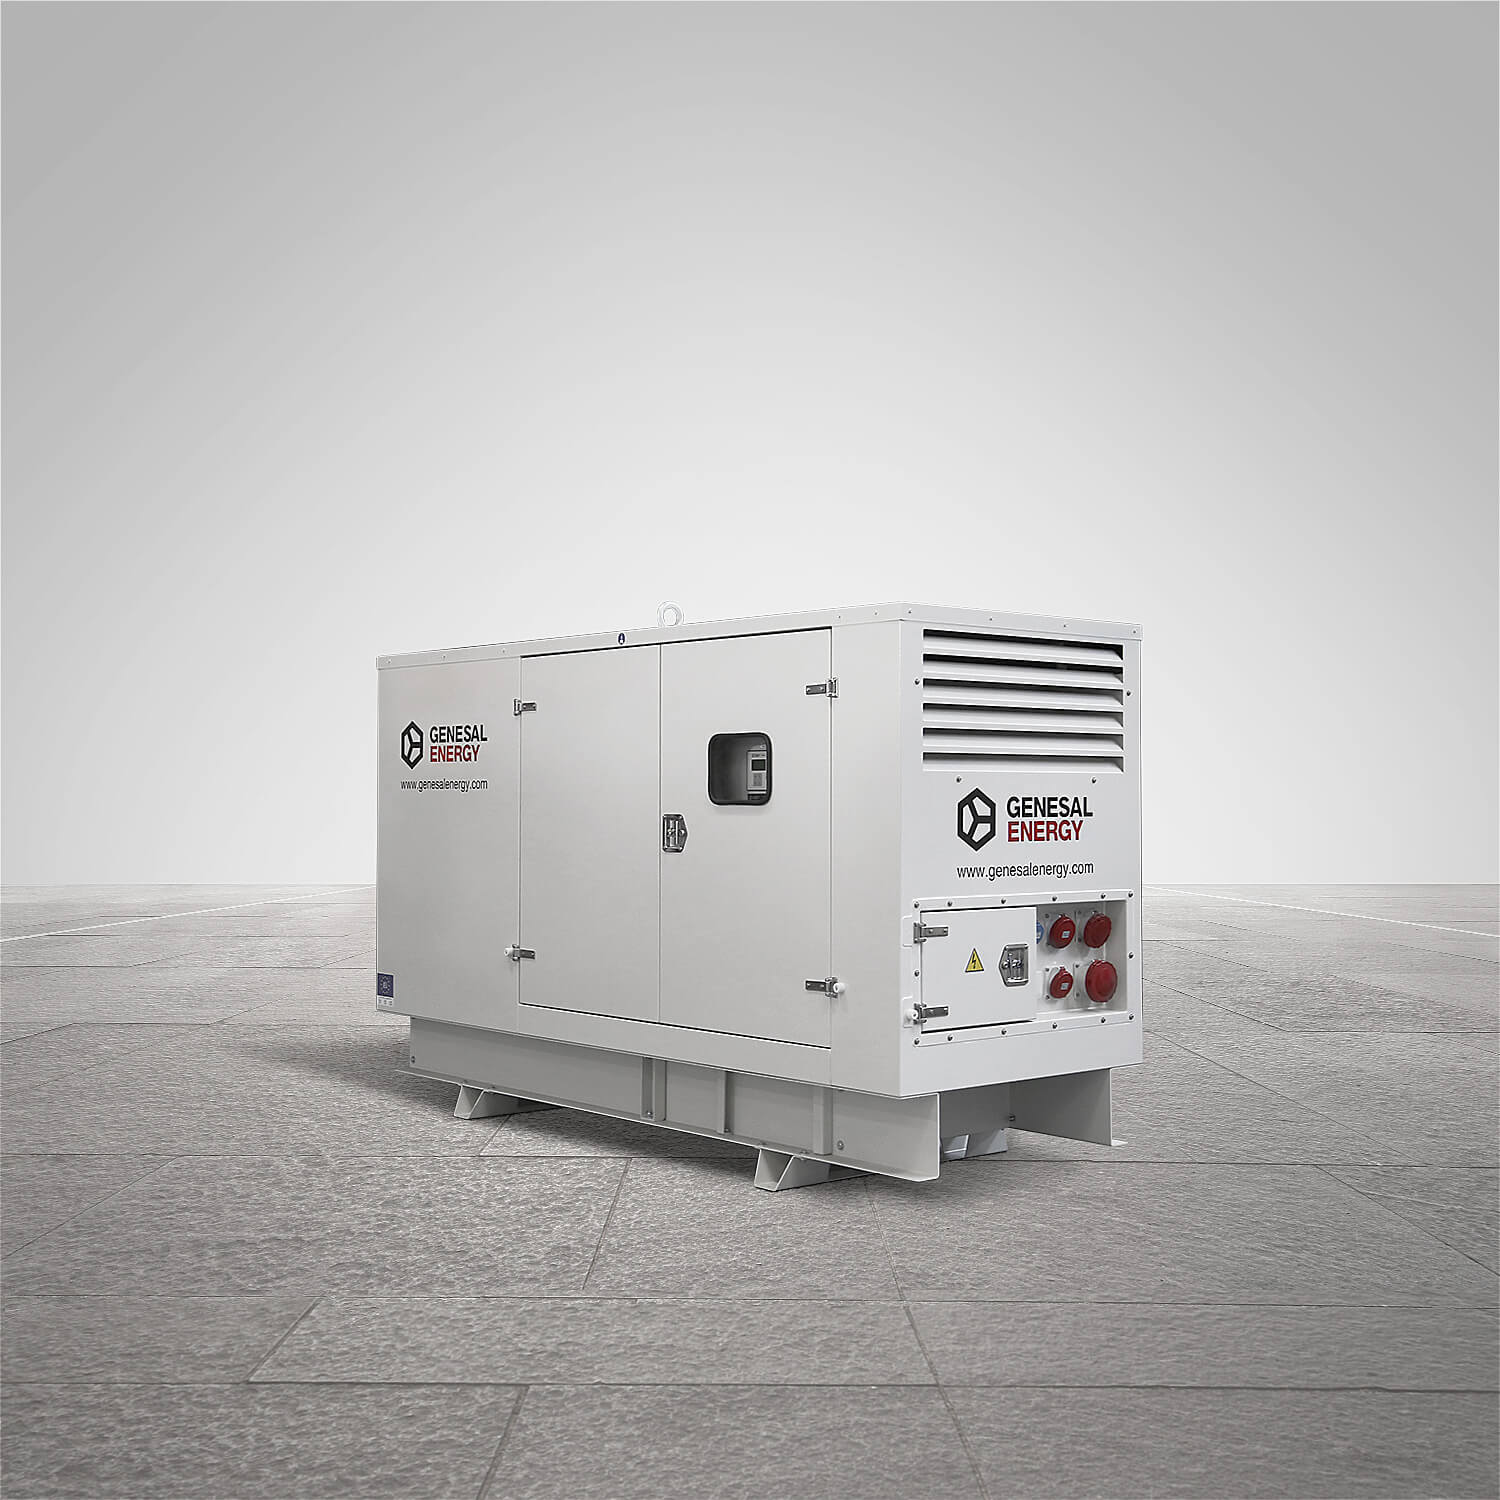 We have supplied a generator set for the rental fleet of our dealer in Denmark